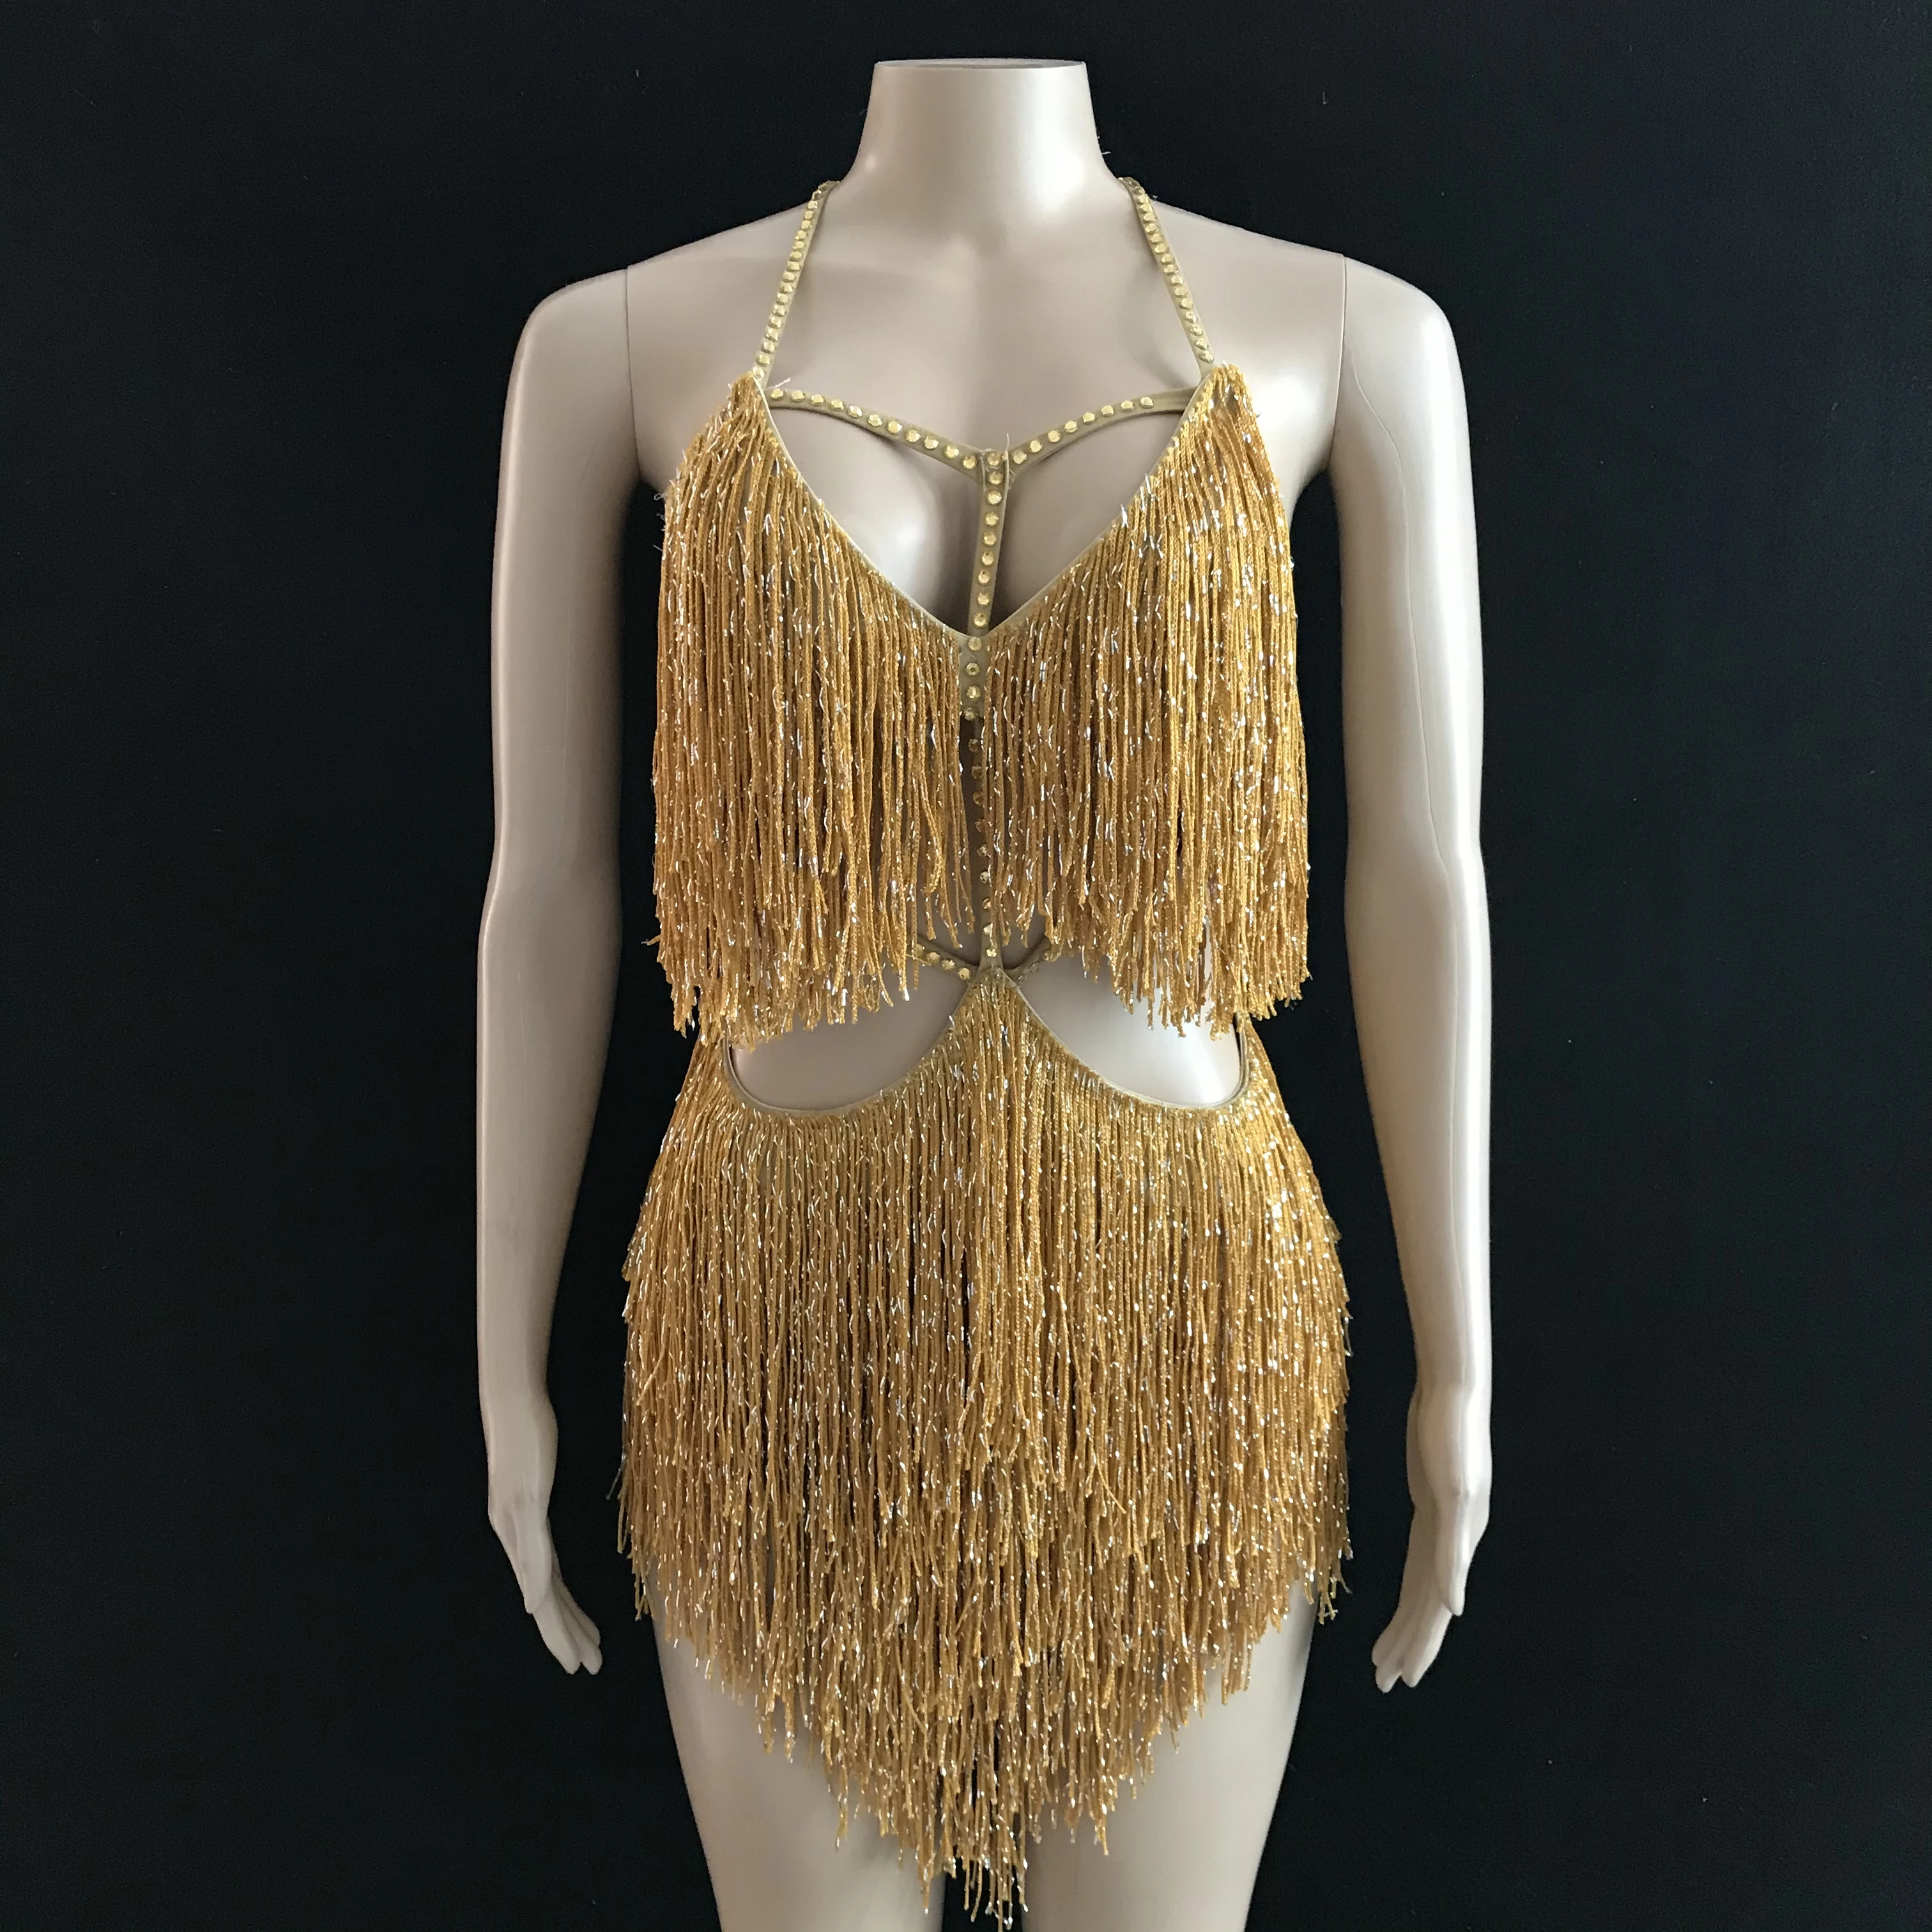 Fashion Gold Fringes Costume Outfit Tassel Dress Evening Birthday Party Dance wear Nightclub Singer Performance CLothing